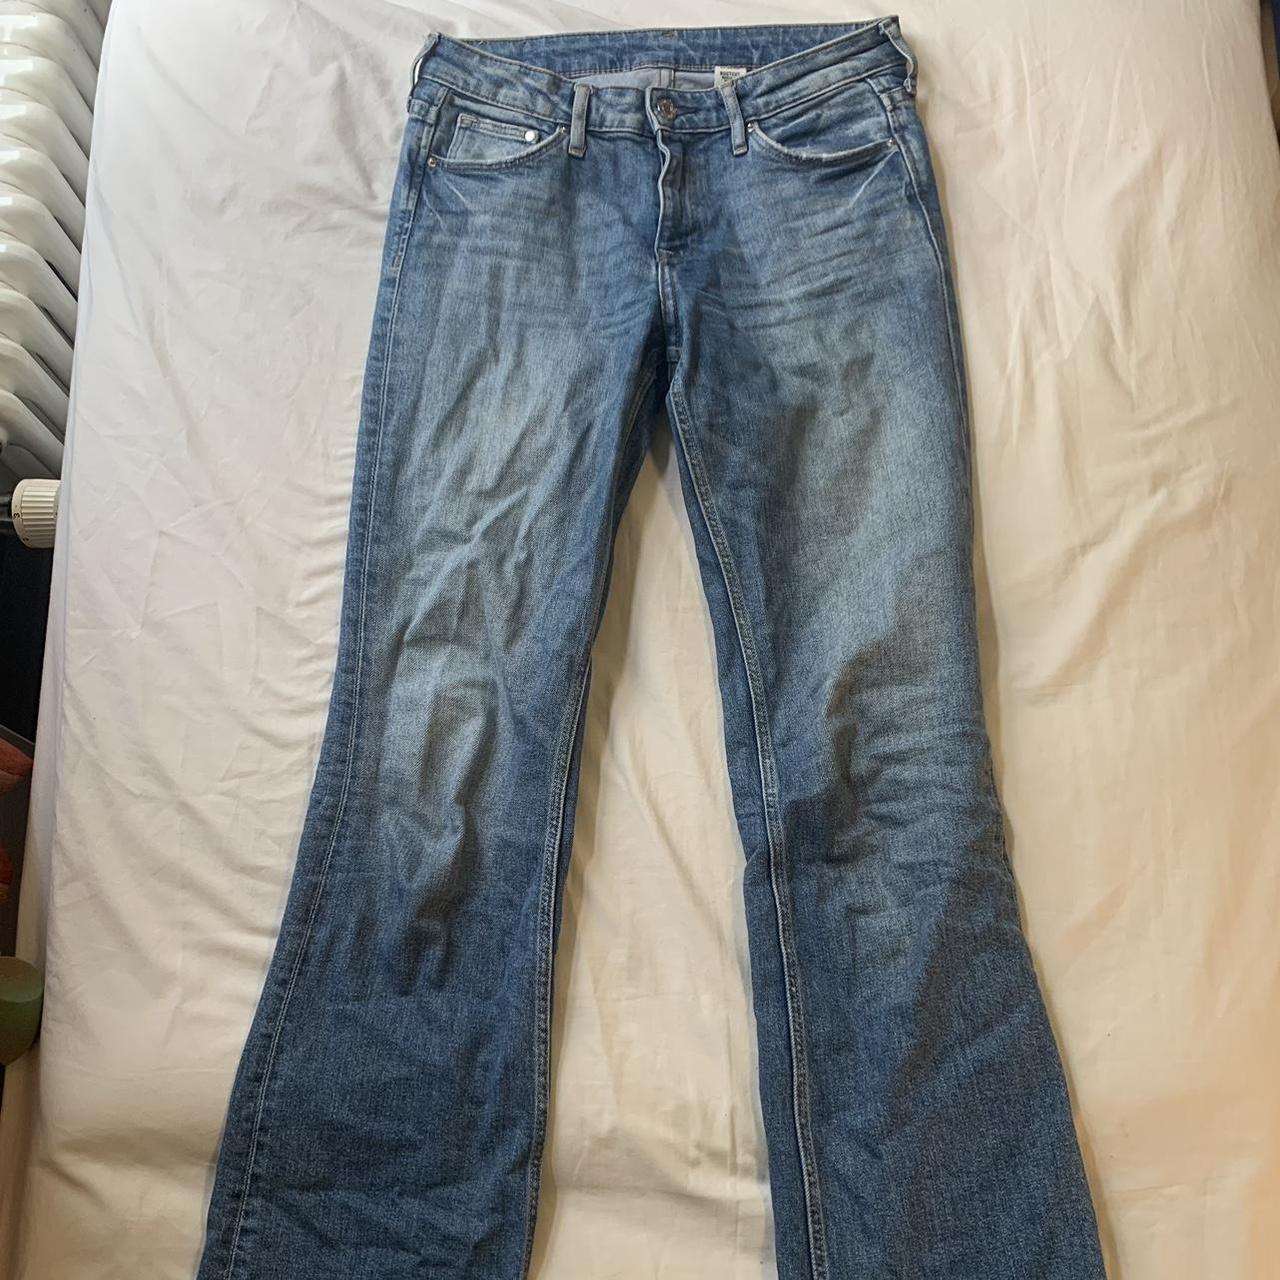 H and m low rise boot cut jeans really flattering... - Depop